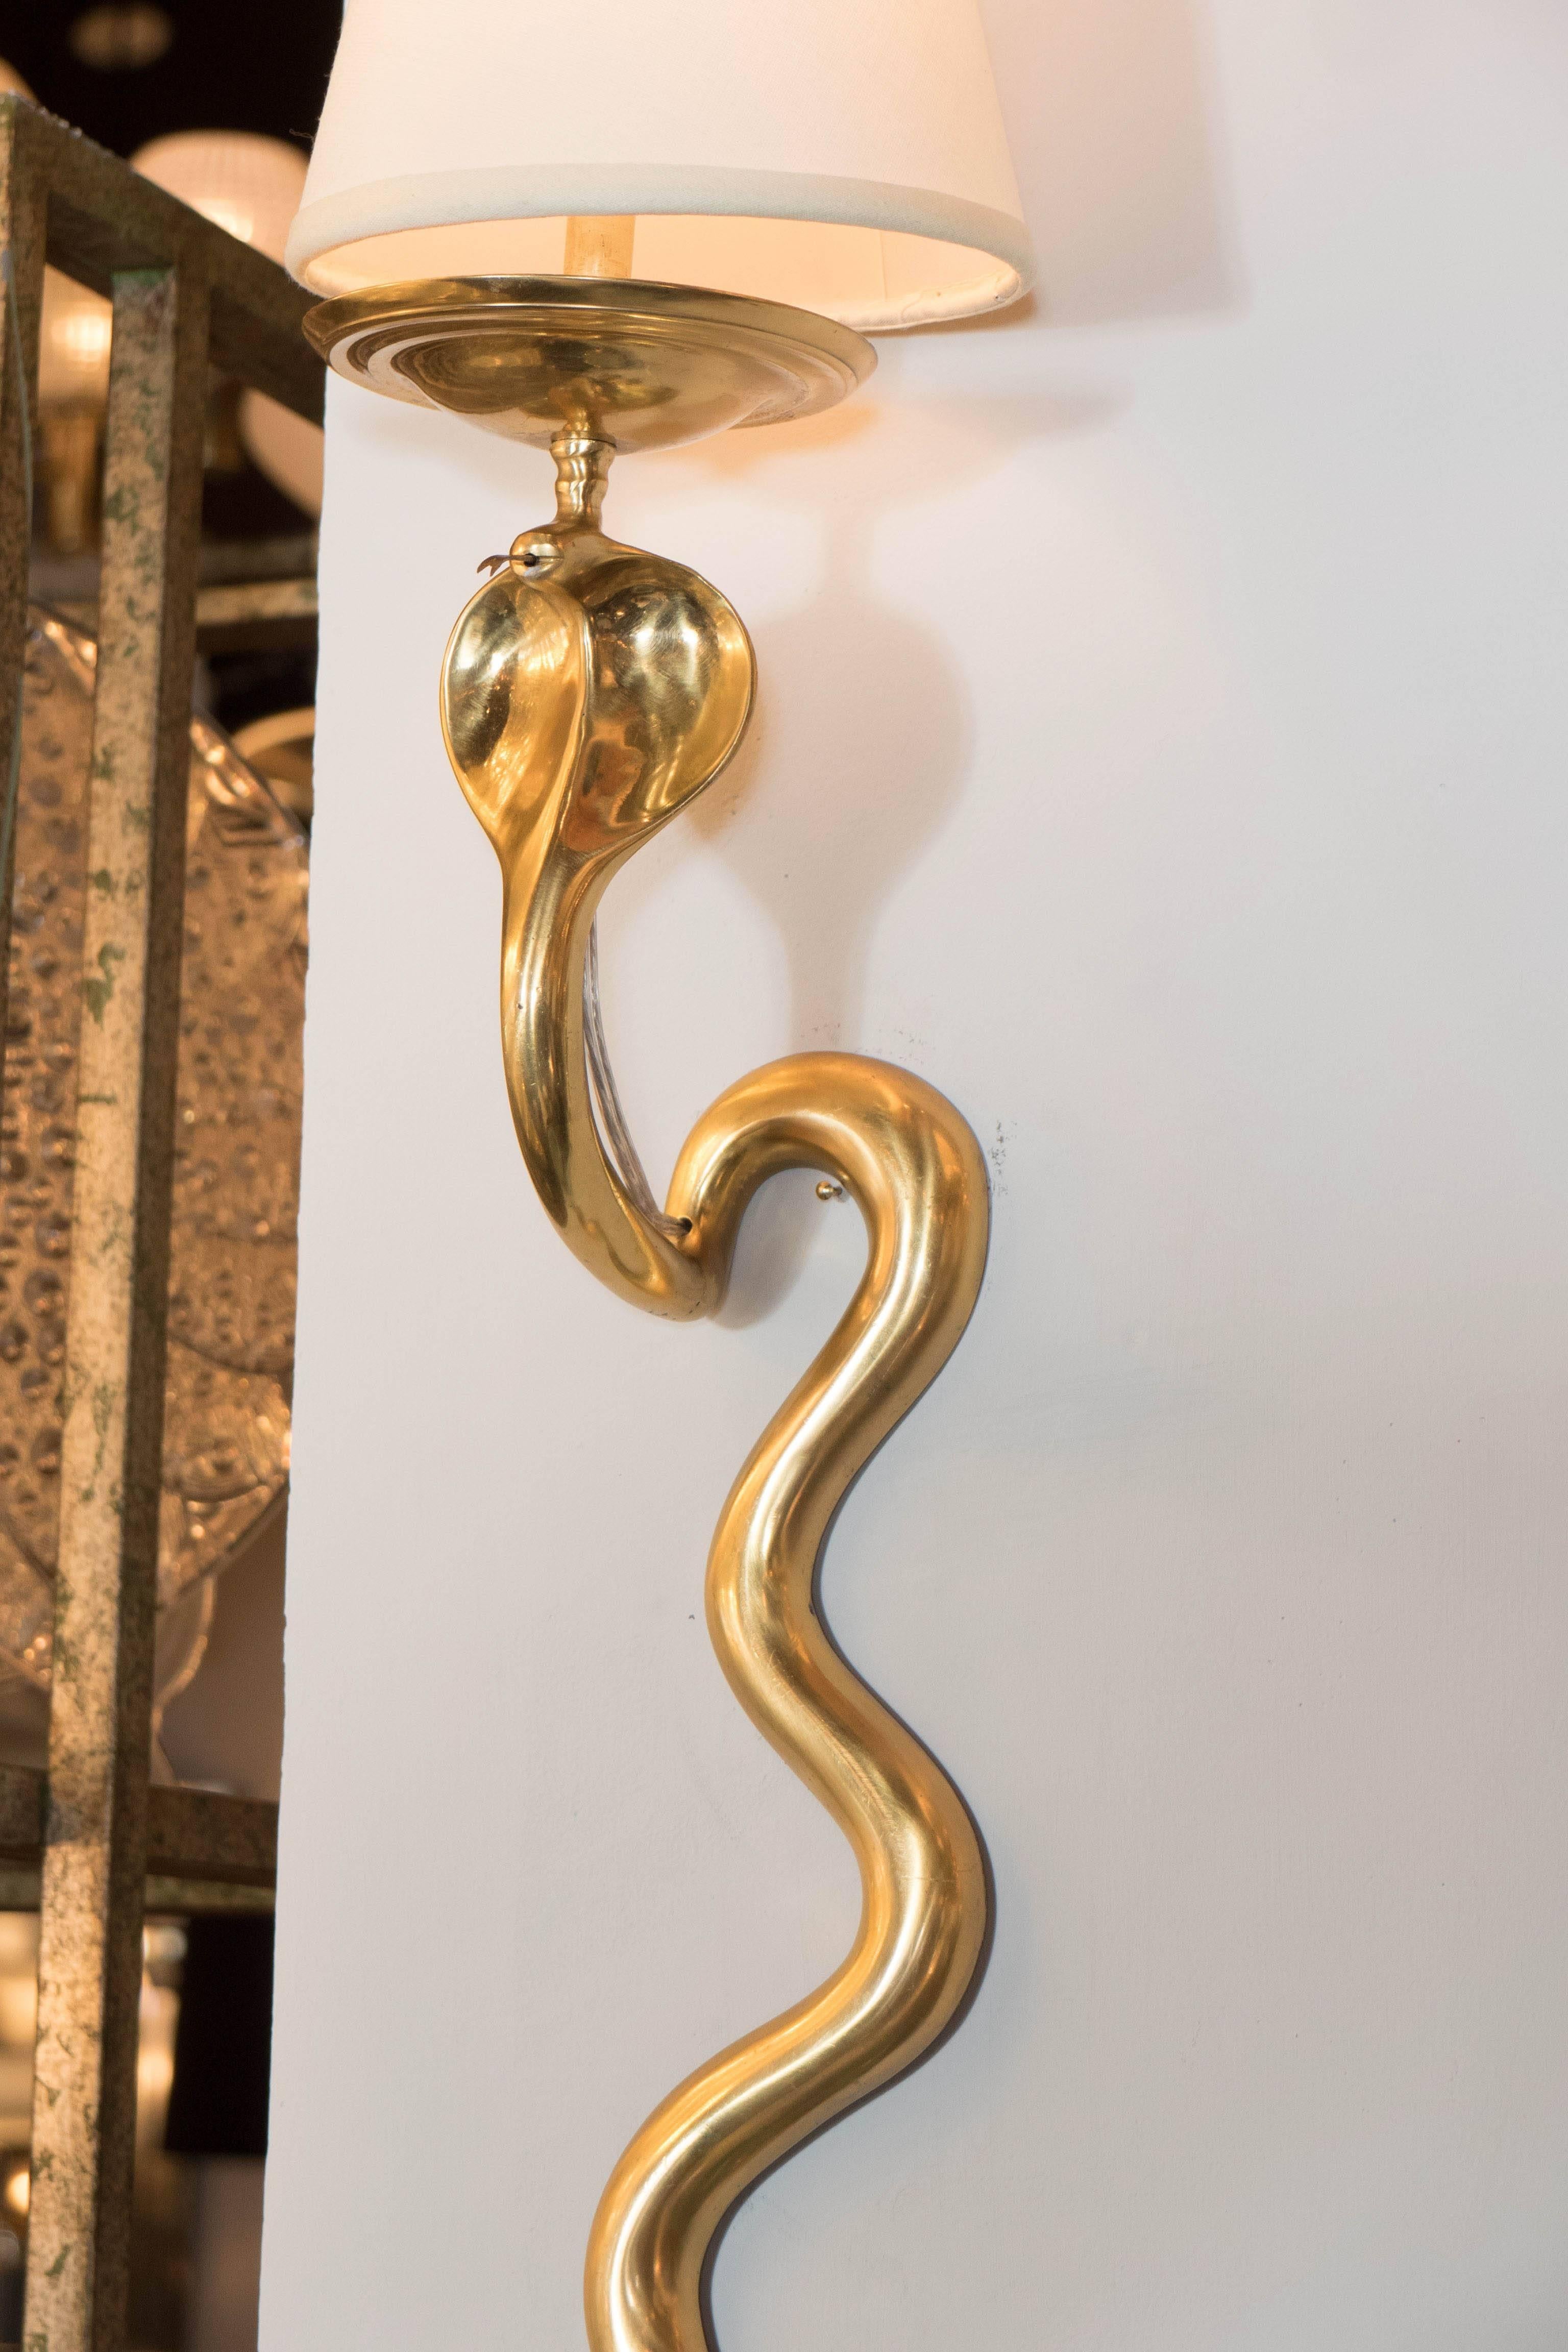 Mid-20th Century Pair of French Polished Brass Forked Tongue Cobra Sconces